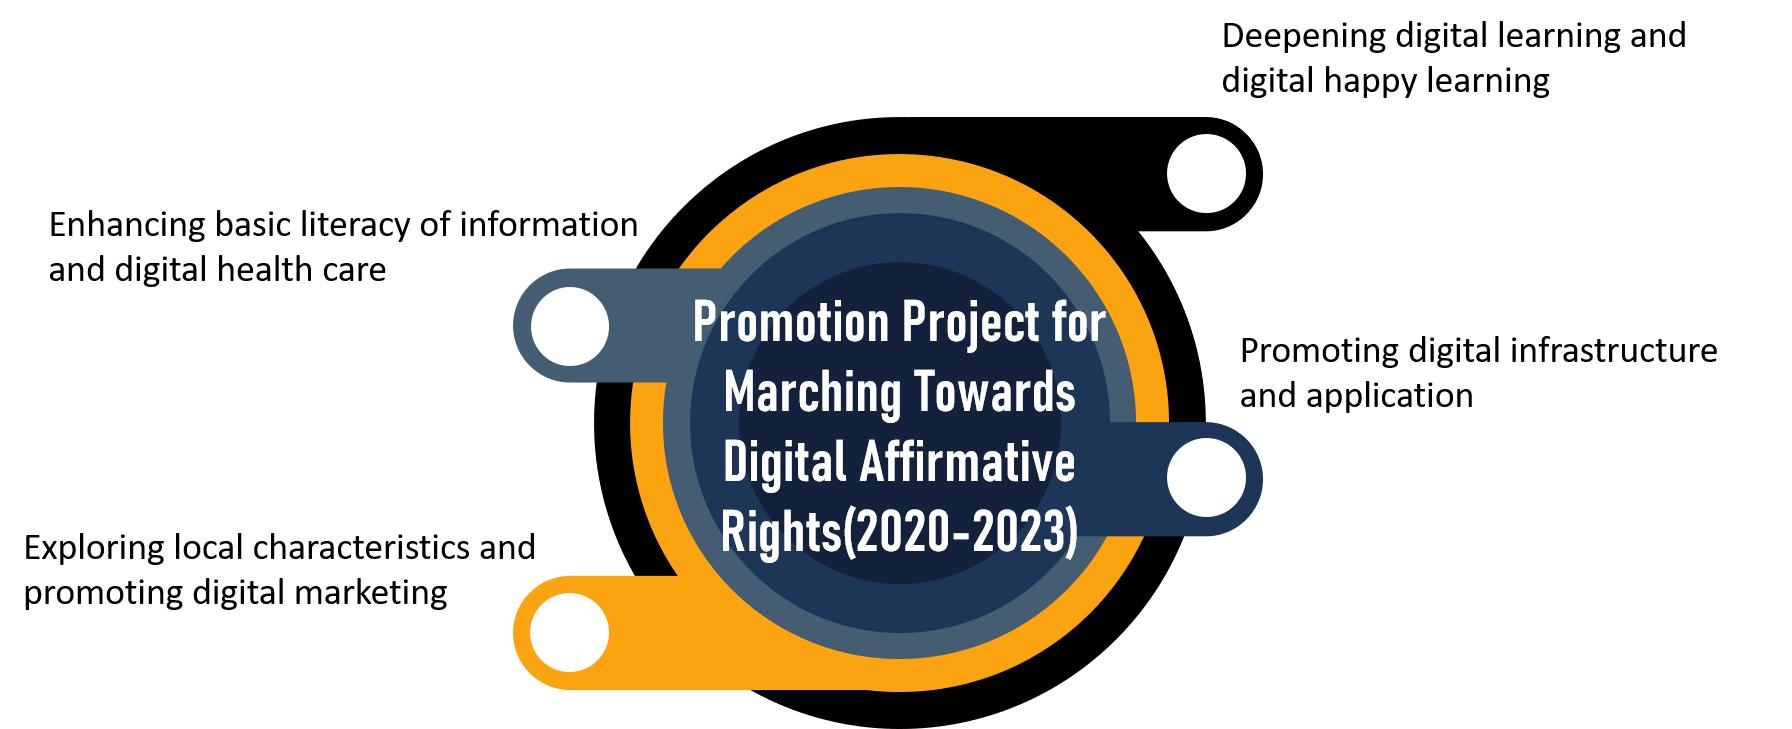 Figure 3: Four main strategies in the 'Promotion Project for Marching Towards Digital Affirmative Rights'.